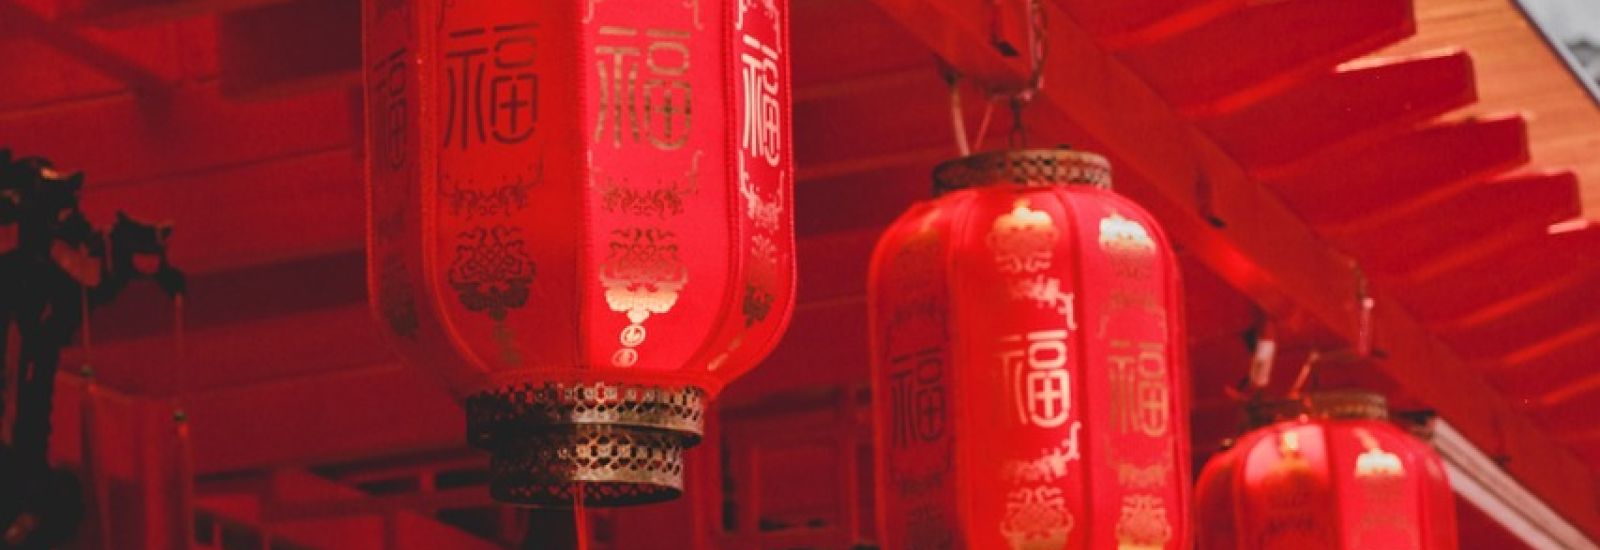 A red, Chinese building is decorated with red hanging lanterns adorned in Chinese characters